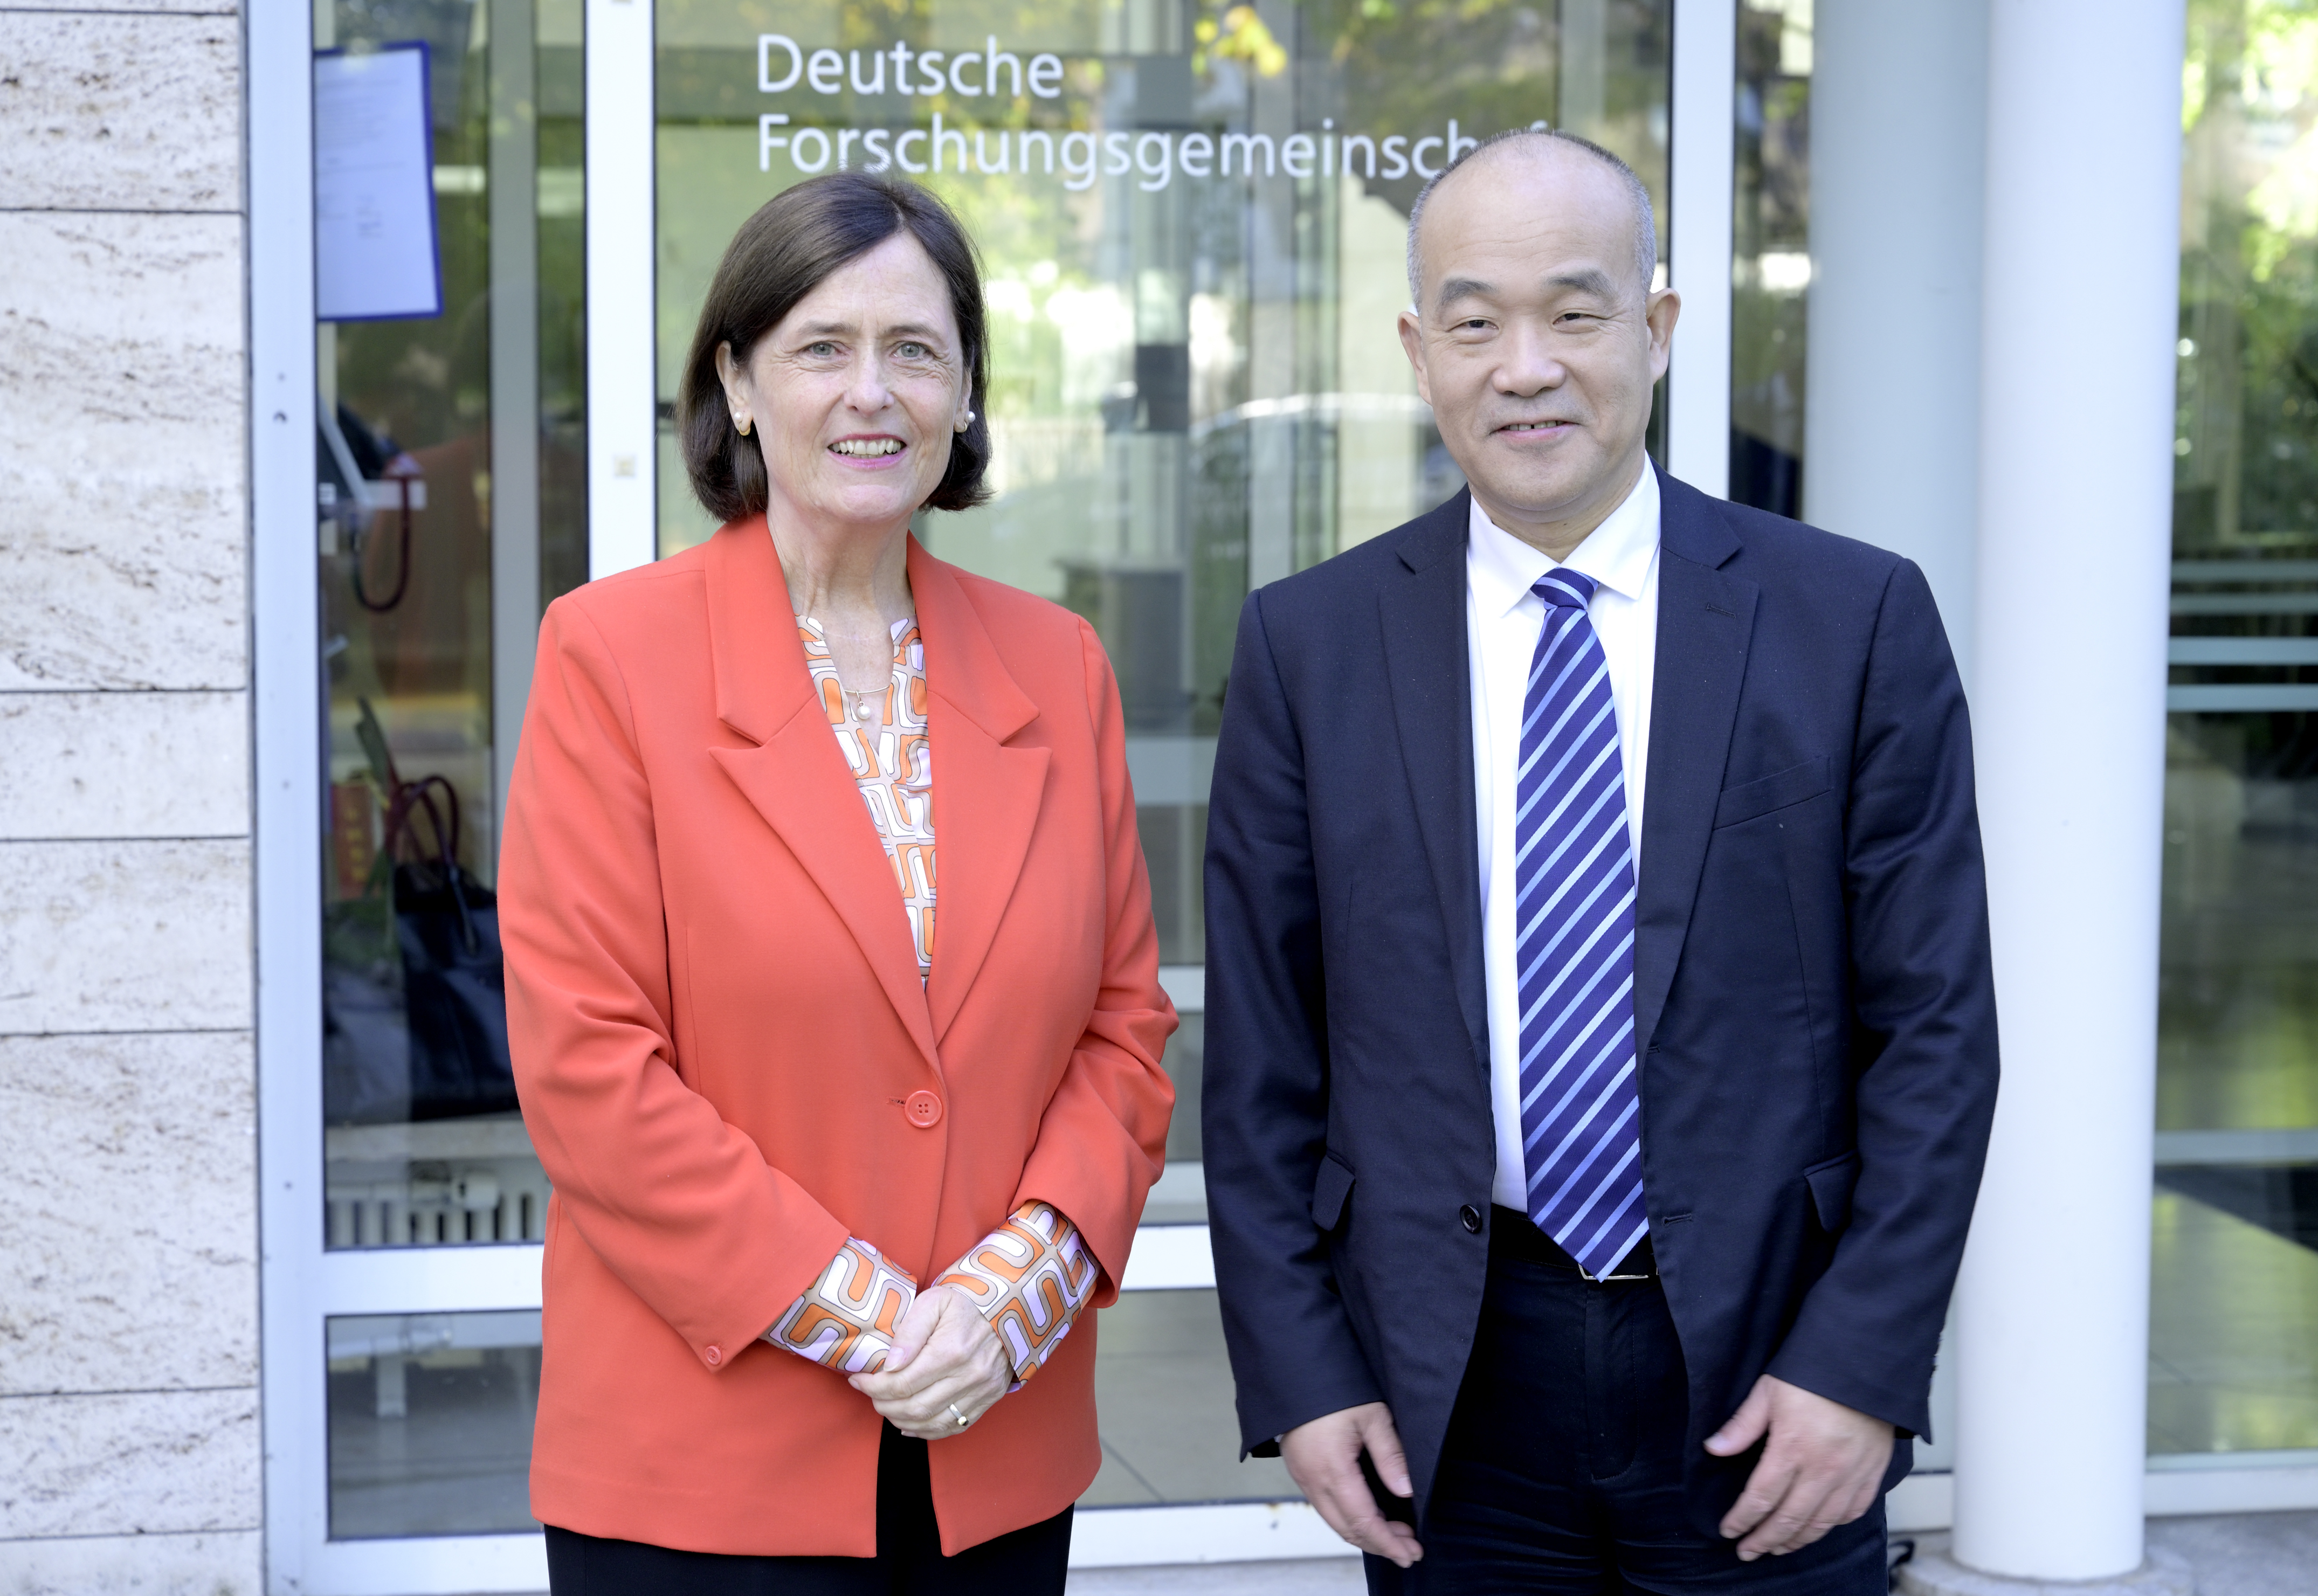 Prof. Dr. Katja Becker, President of the DFG, and Prof. Dou Xiankang, President of the NSFC